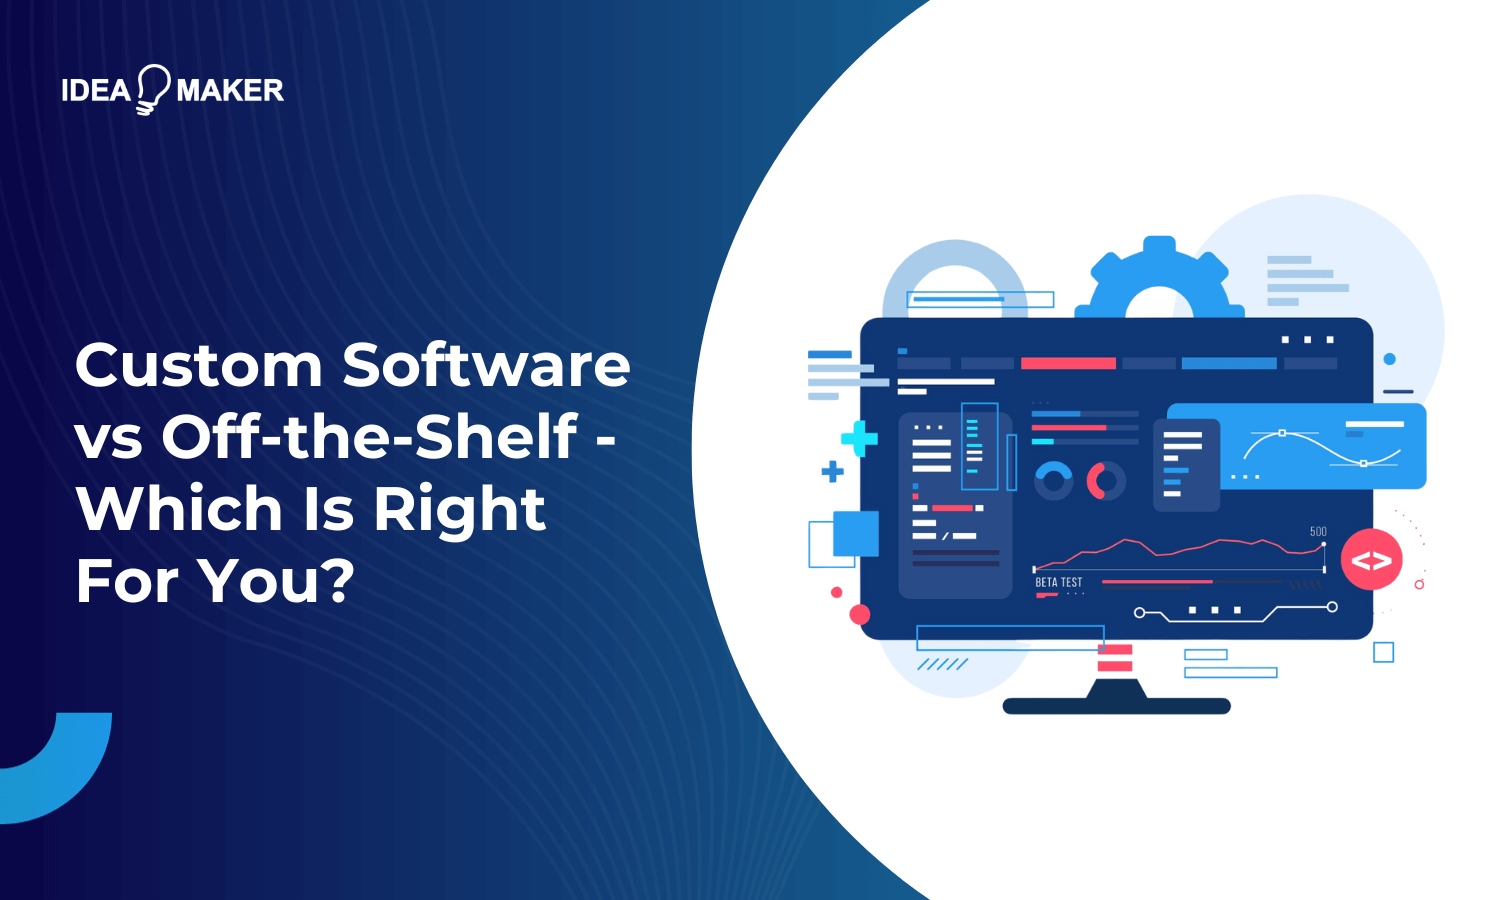 Custom Software vs Off-the-Shelf - Which Is Right For You